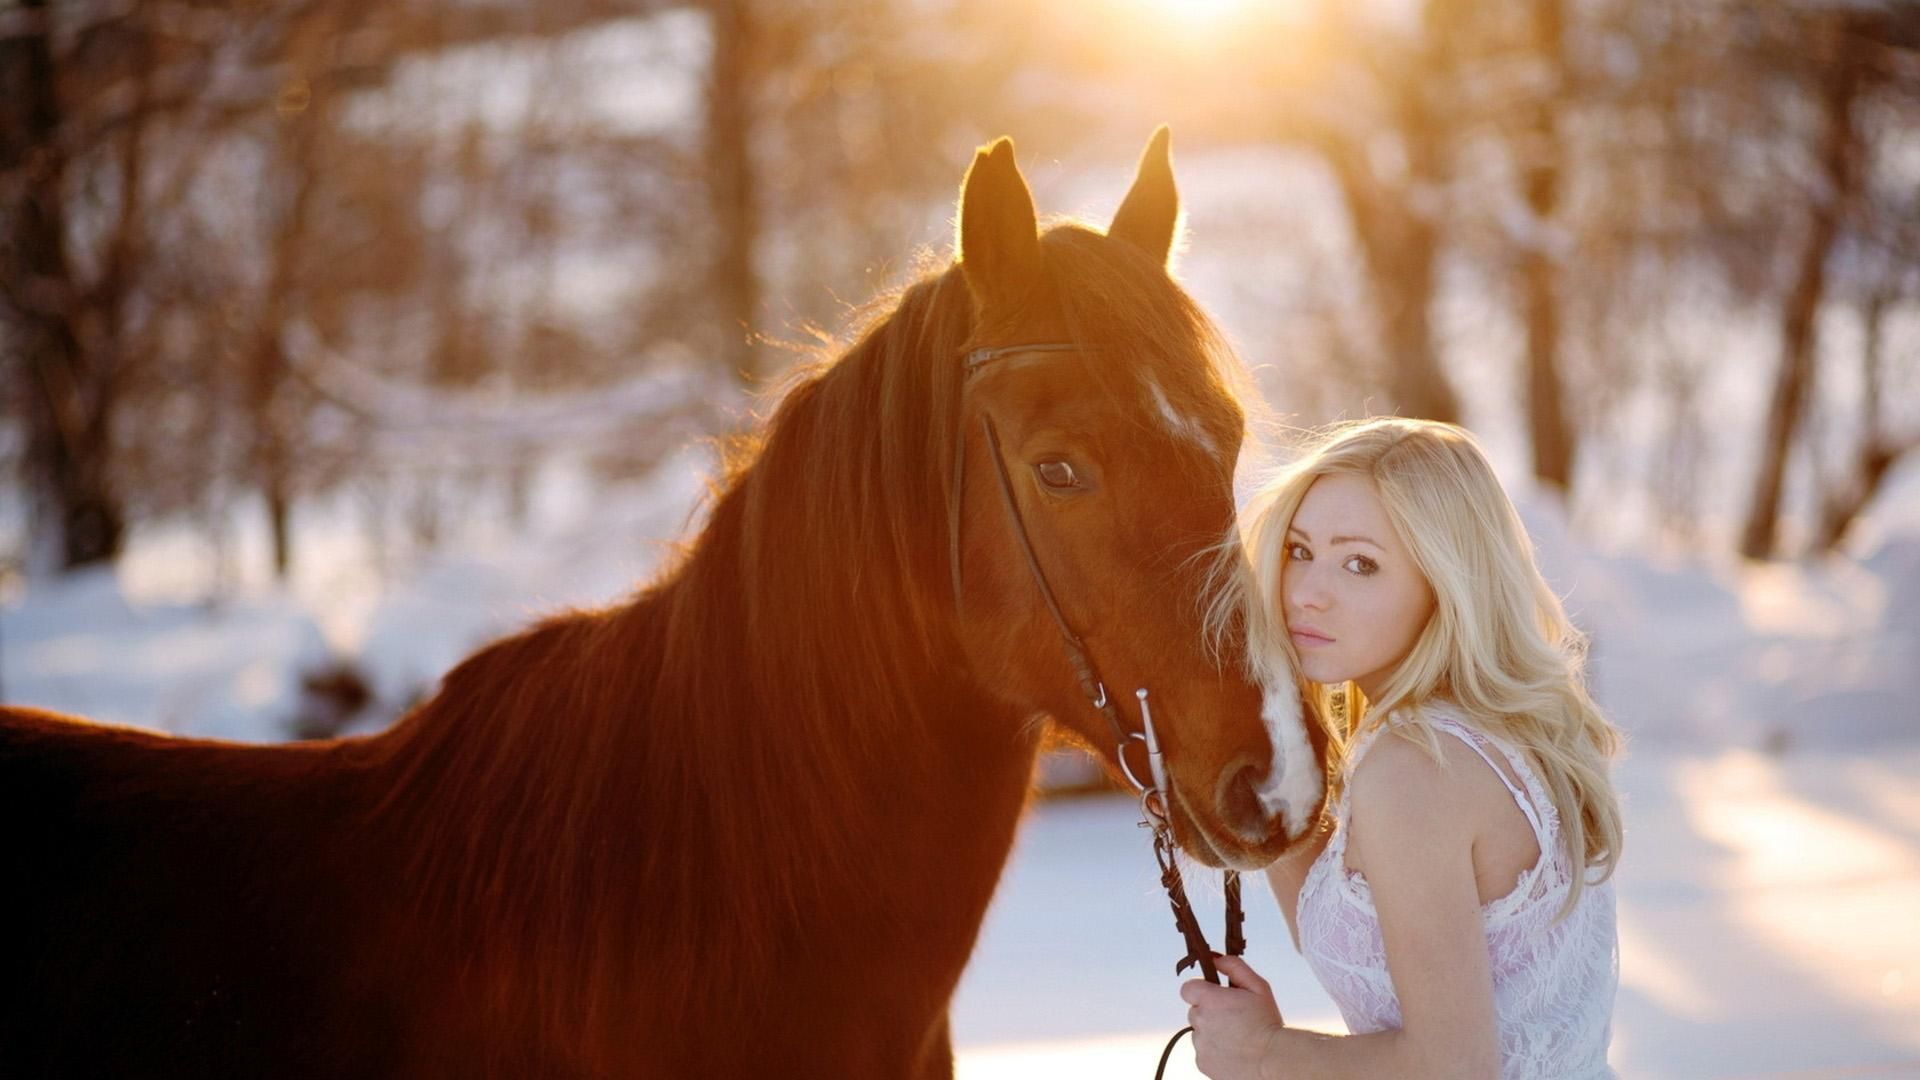 Beauty Girl And Horse Wallpaper Picture 1920x1080. 馬